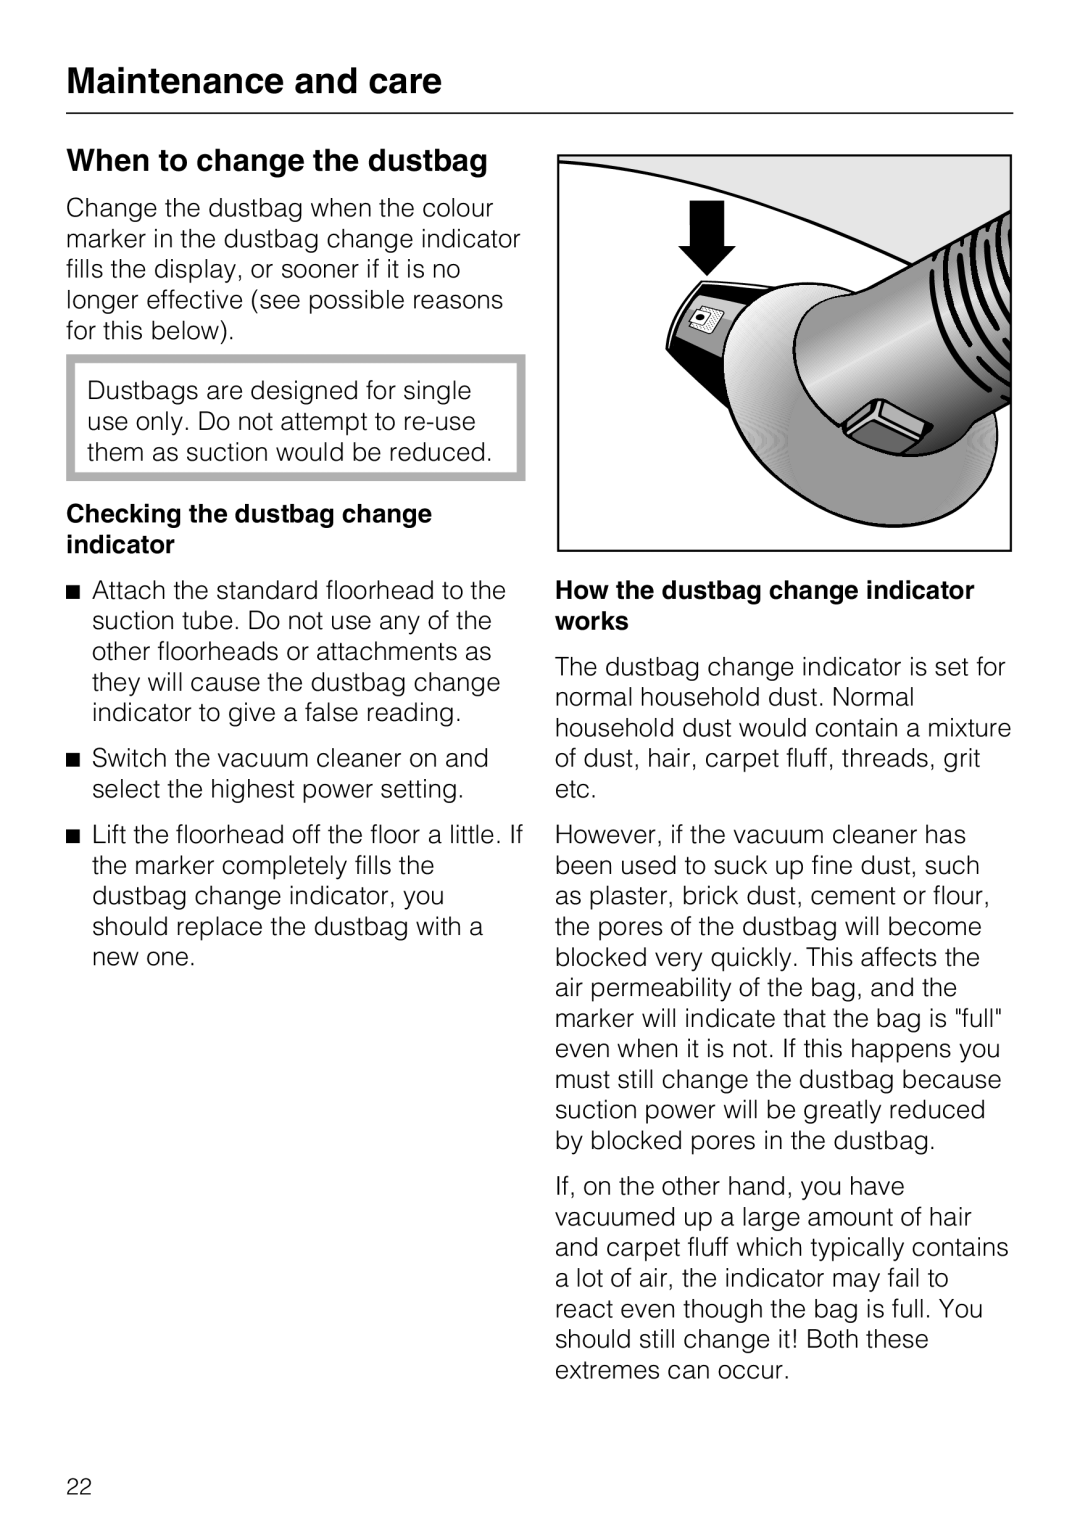 Miele S4212 manual When to change the dustbag, Maintenance and care, Checking the dustbag change indicator 